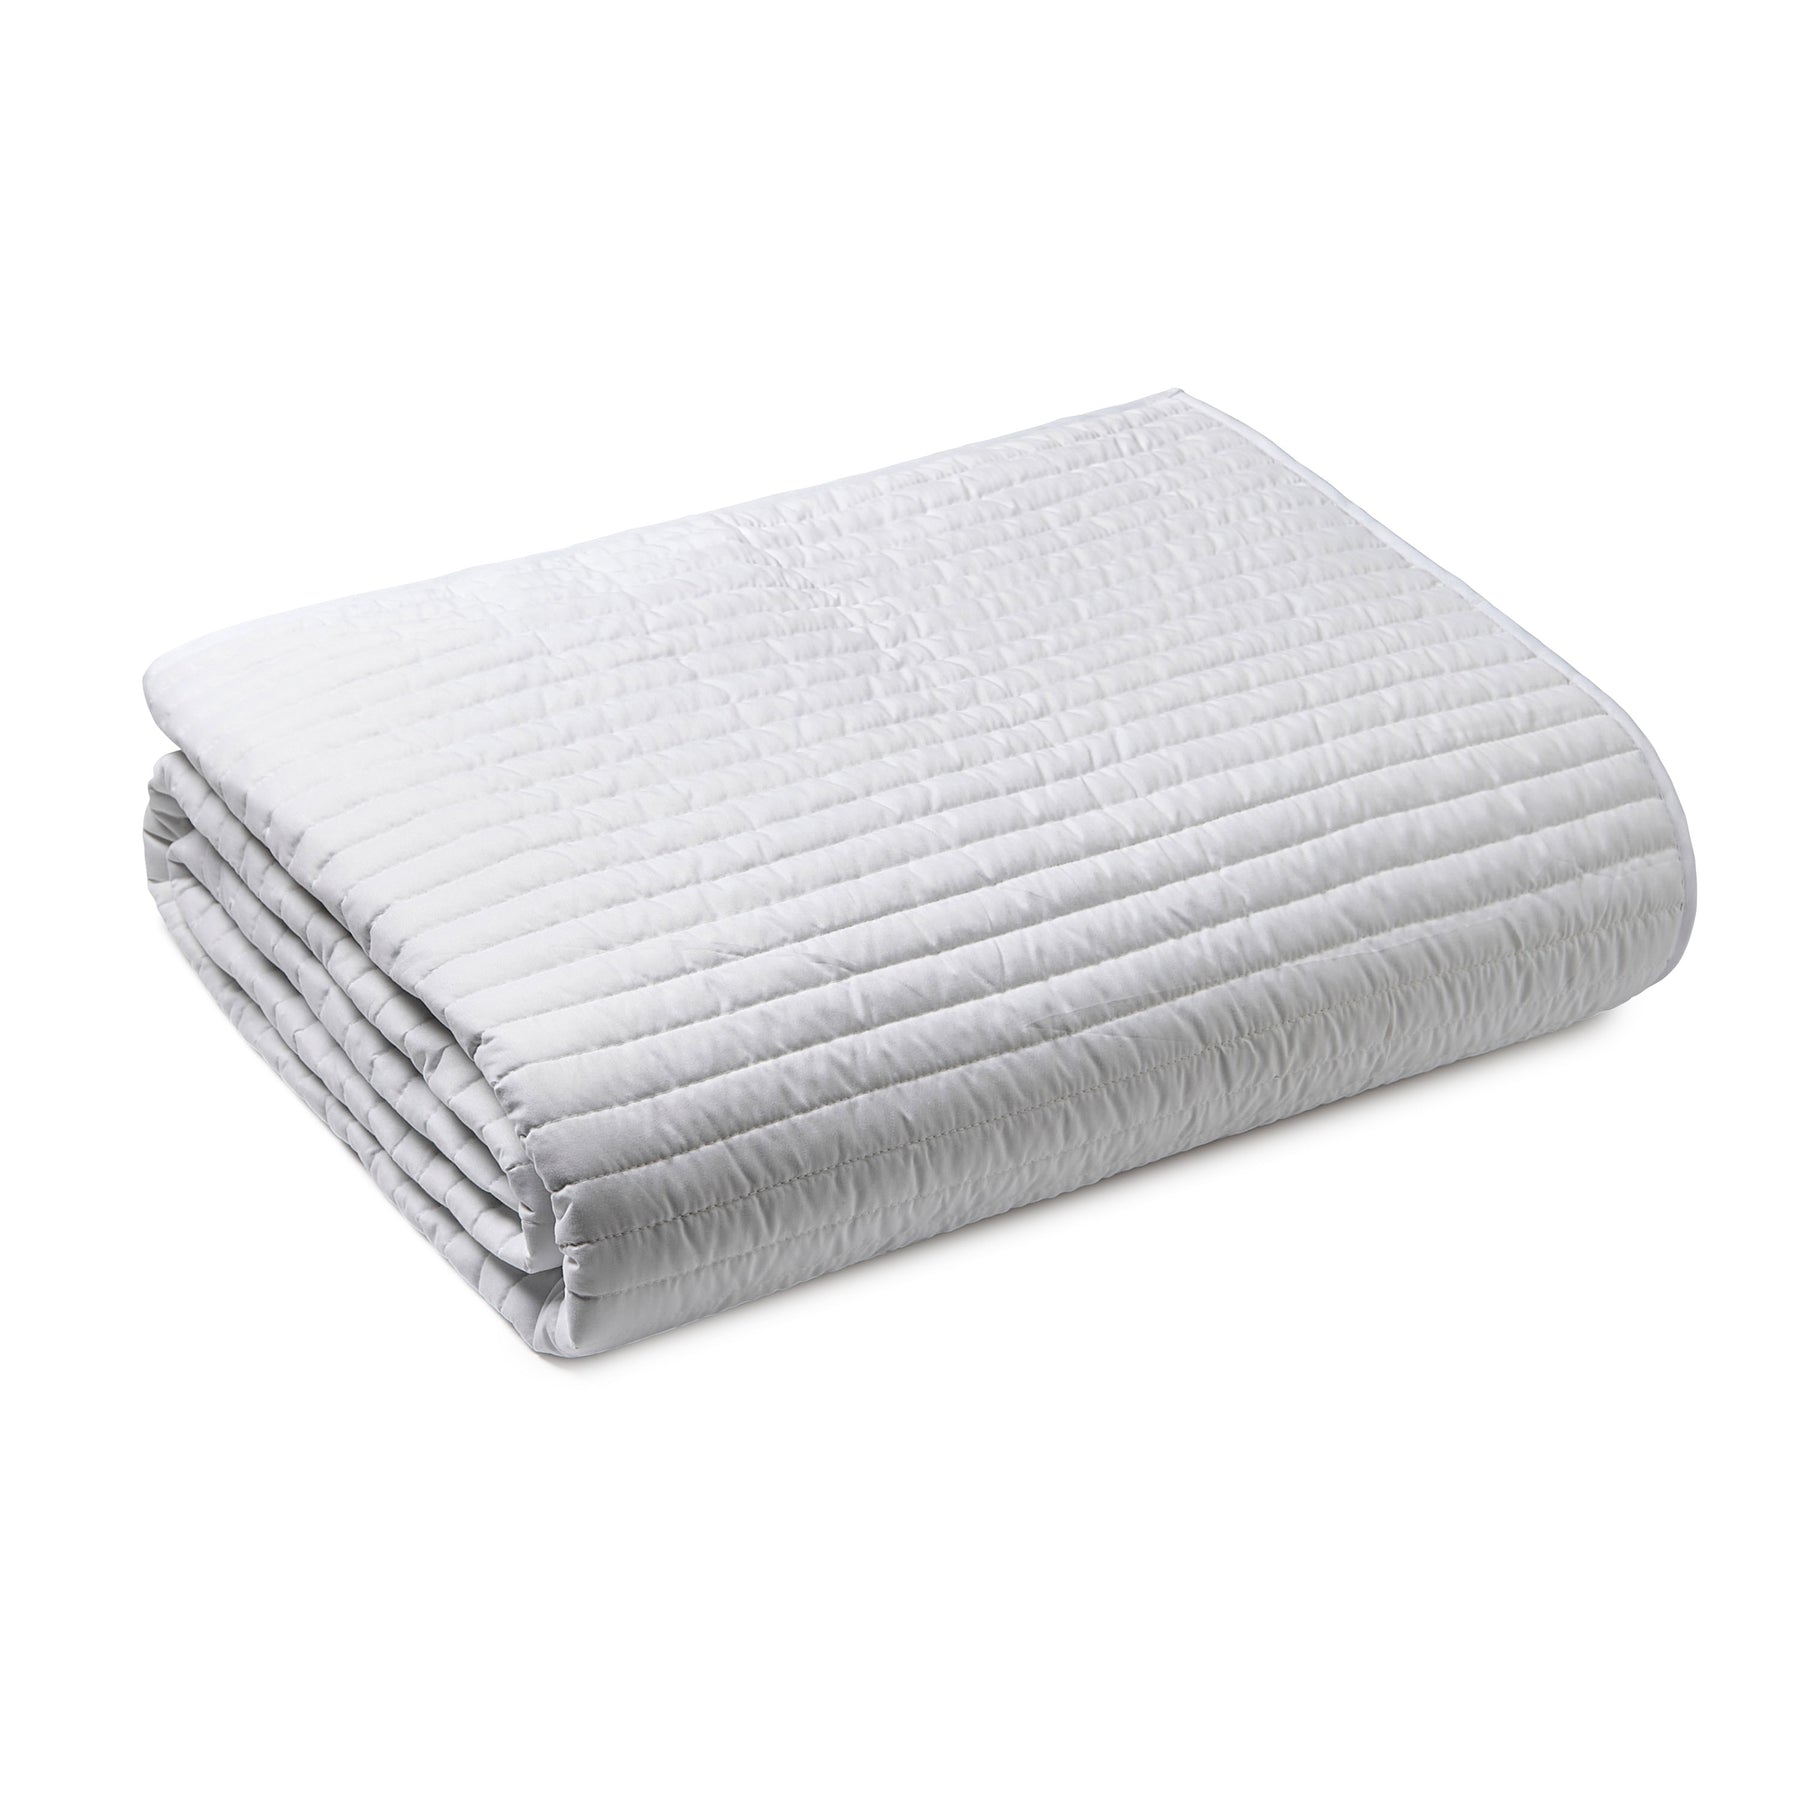 Bianca Quilted Lines Bedspread 220cm x 230cm White